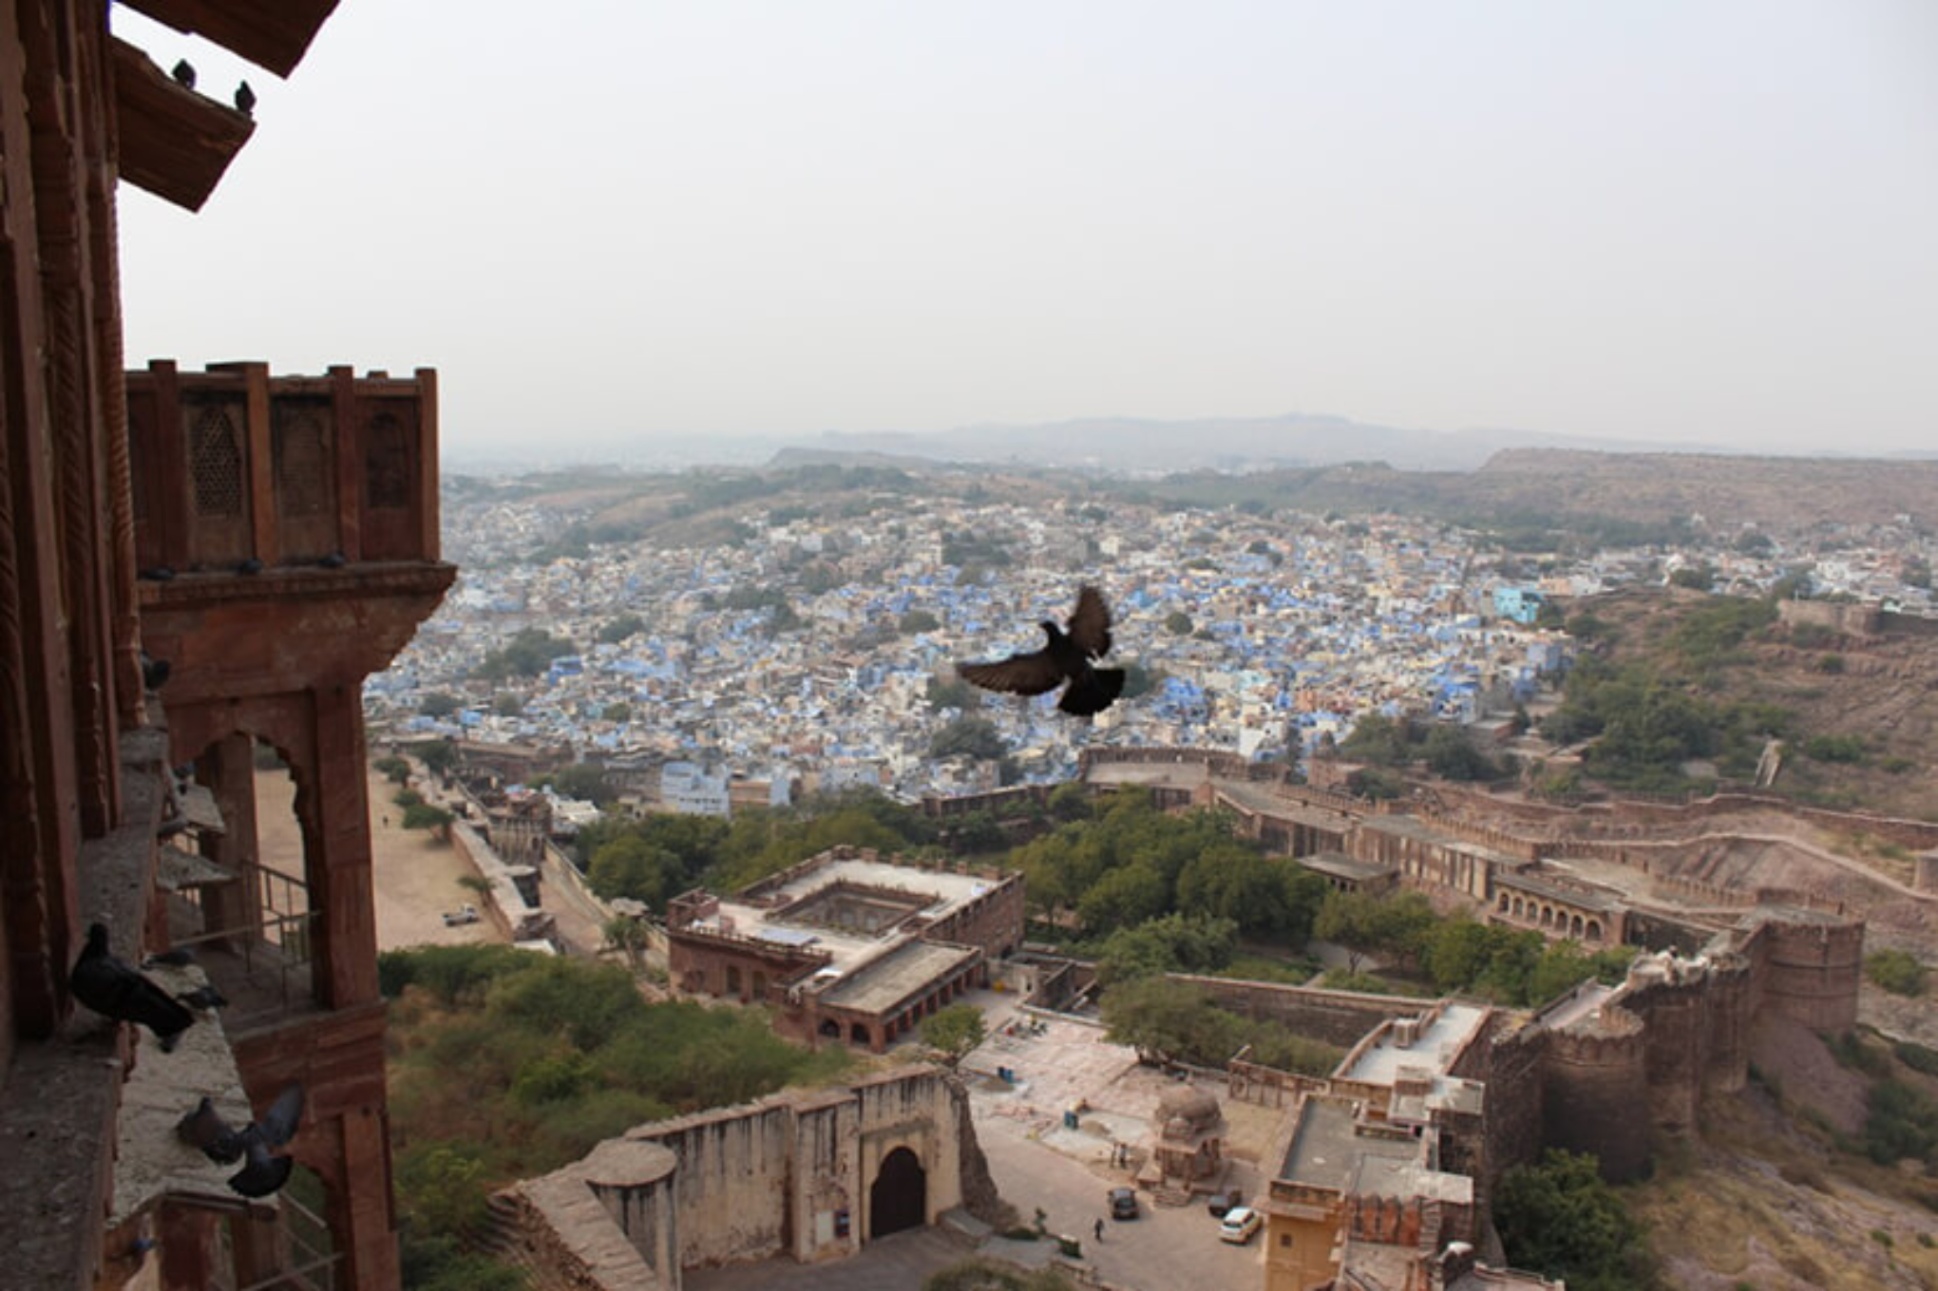 See all the attractions of Jodhpur with a Taxi